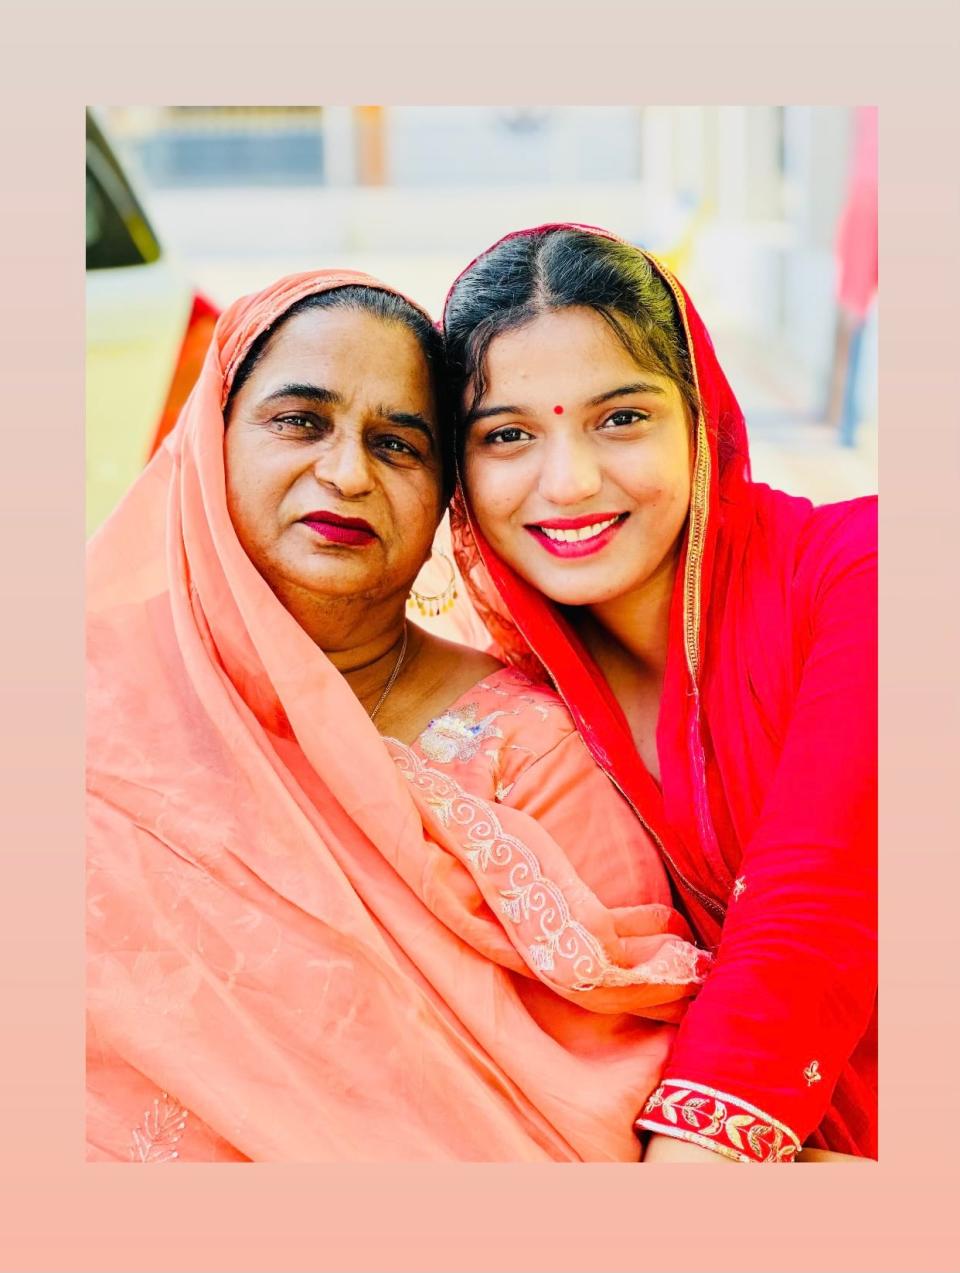 Mahakpreet Kaur, an 18-year-old student in Winnipeg, is looking forward to seeing her mother this weekend, as she is coming from India to celebrate her birthday and Mother's Day.  